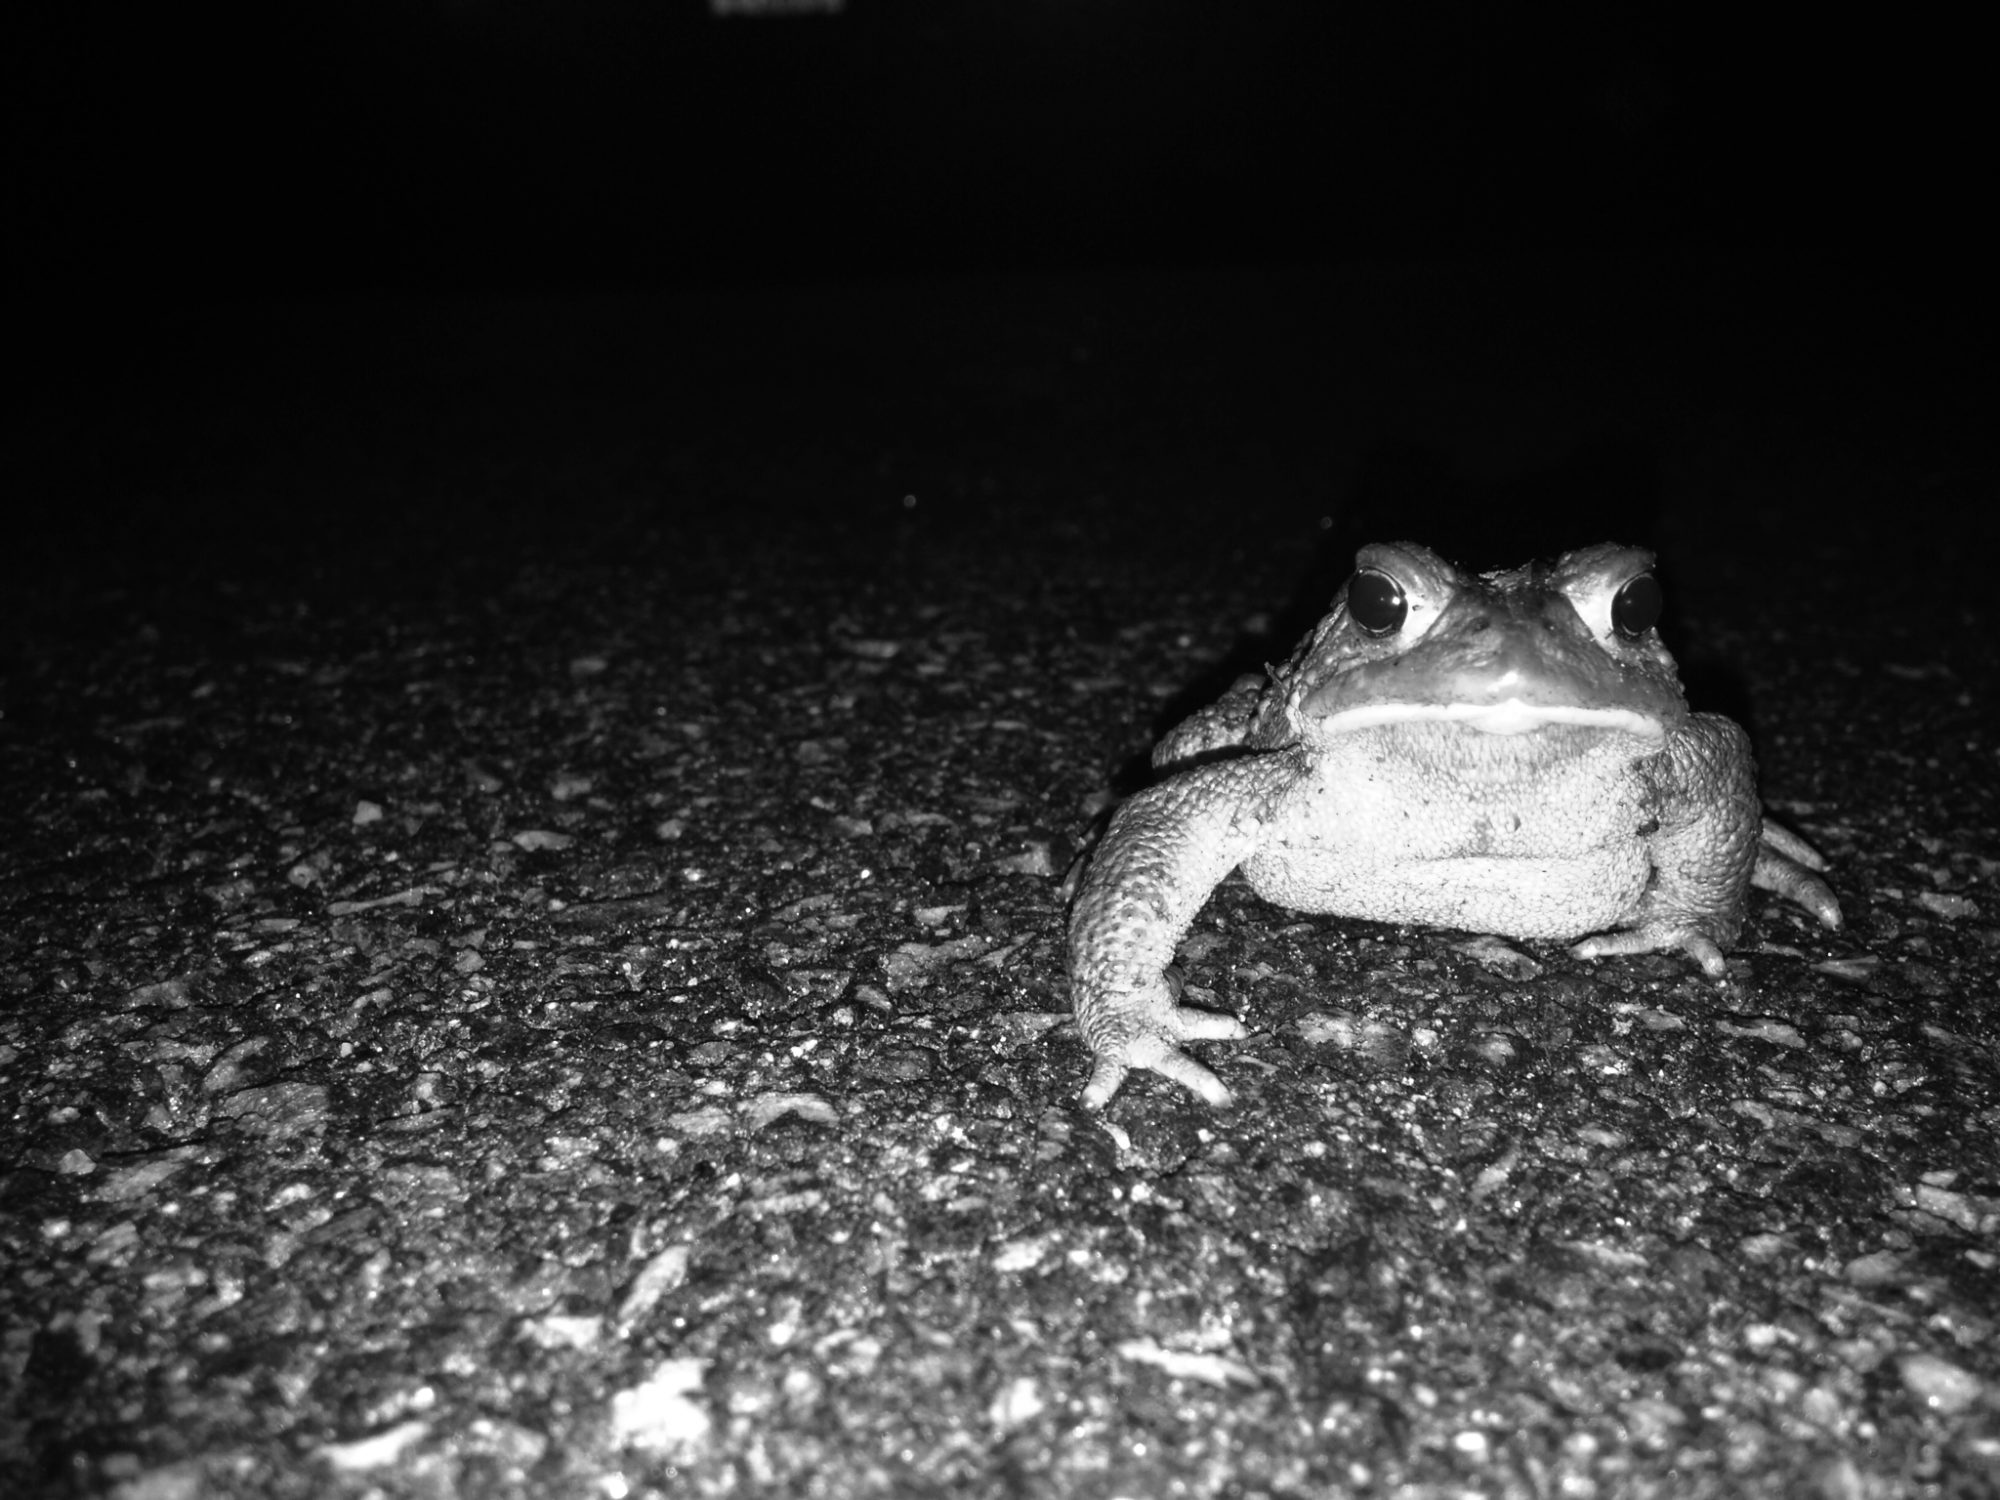 A toad crawls across a paved road. (photo © Russ Cobb)